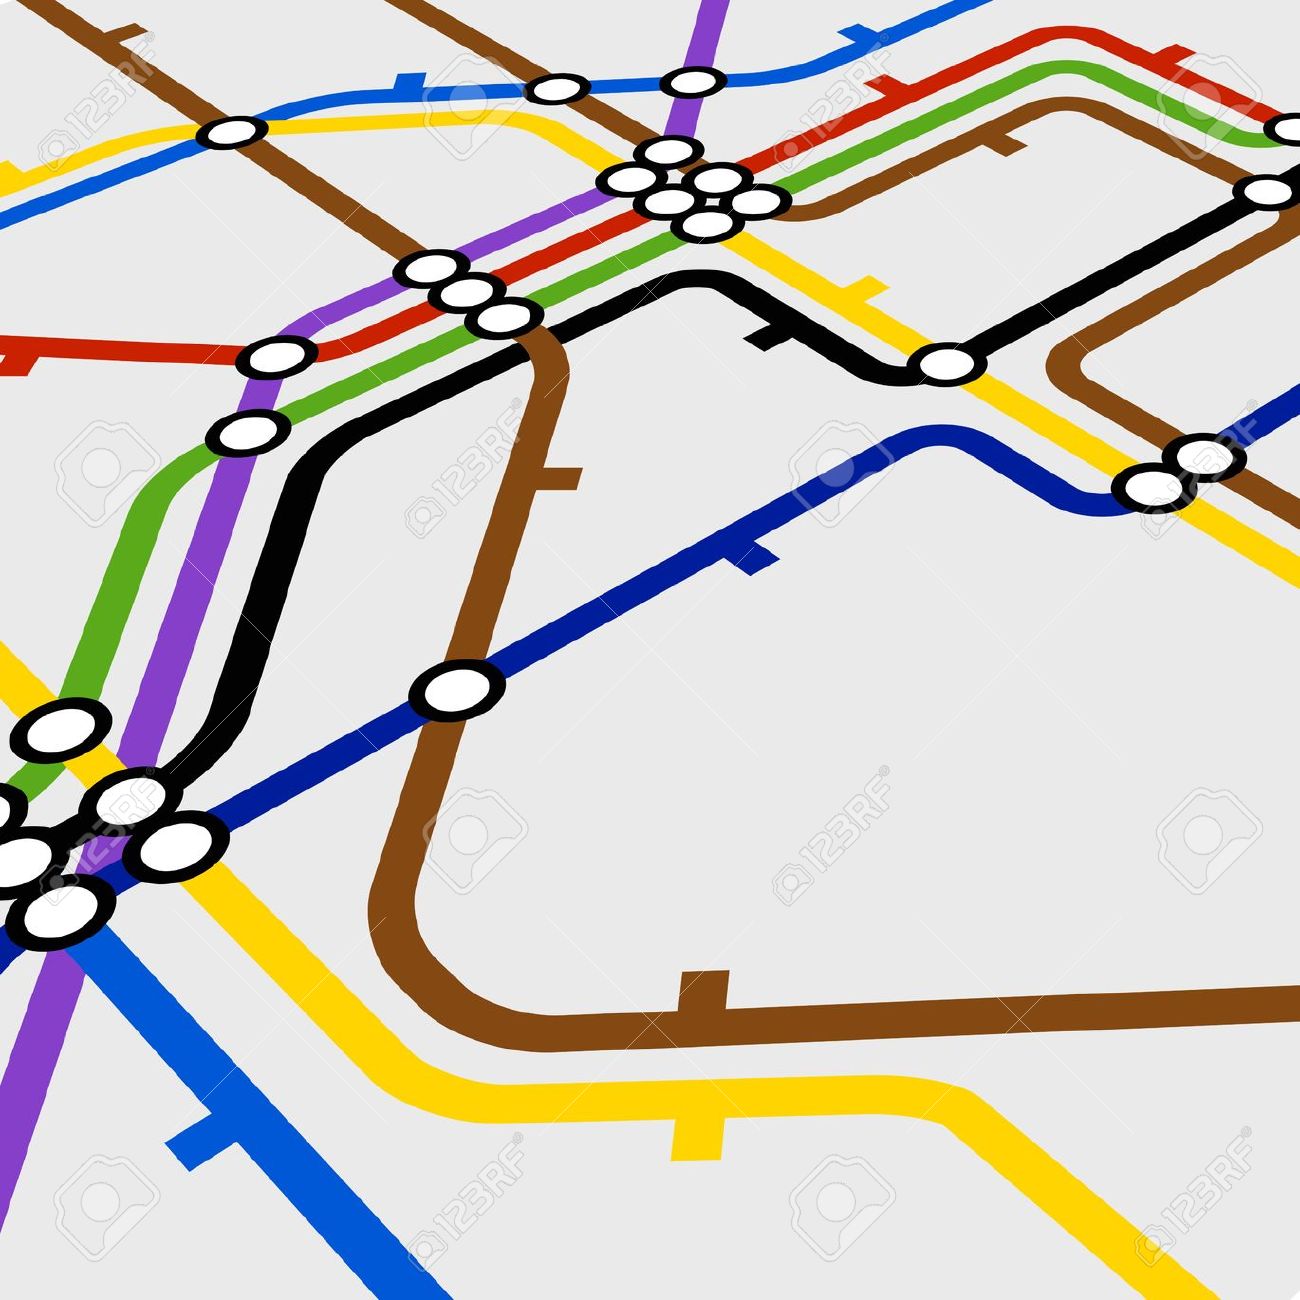 Scheme Map Road Metro Perspective Background Of Royalty Free ...